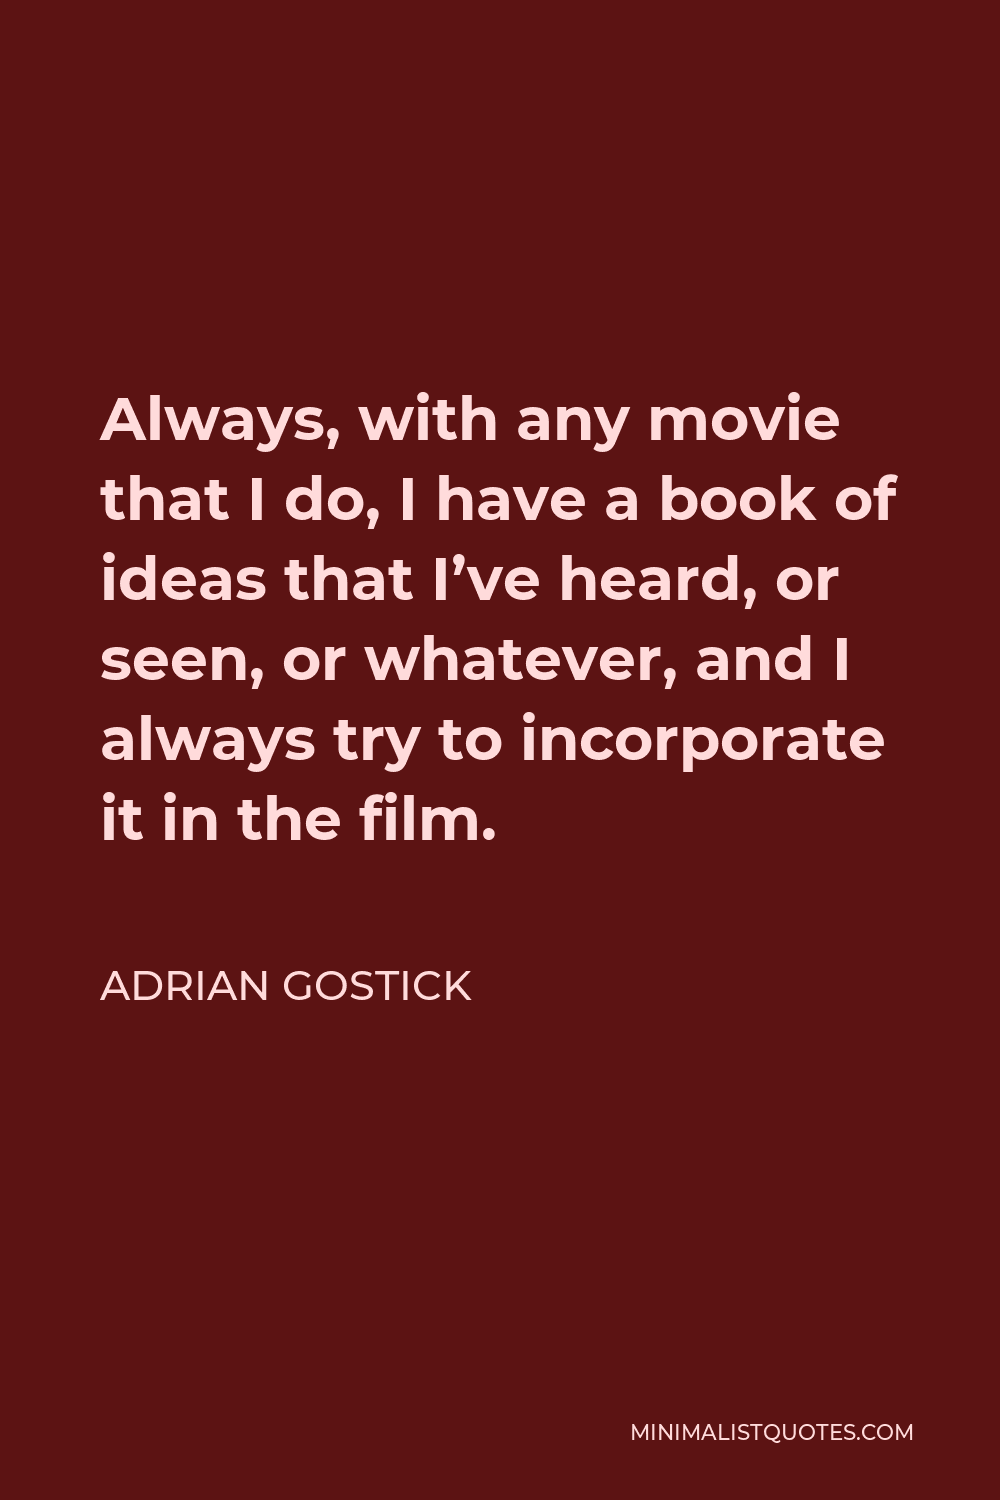 Adrian Gostick Quote - Always, with any movie that I do, I have a book of ideas that I’ve heard, or seen, or whatever, and I always try to incorporate it in the film.